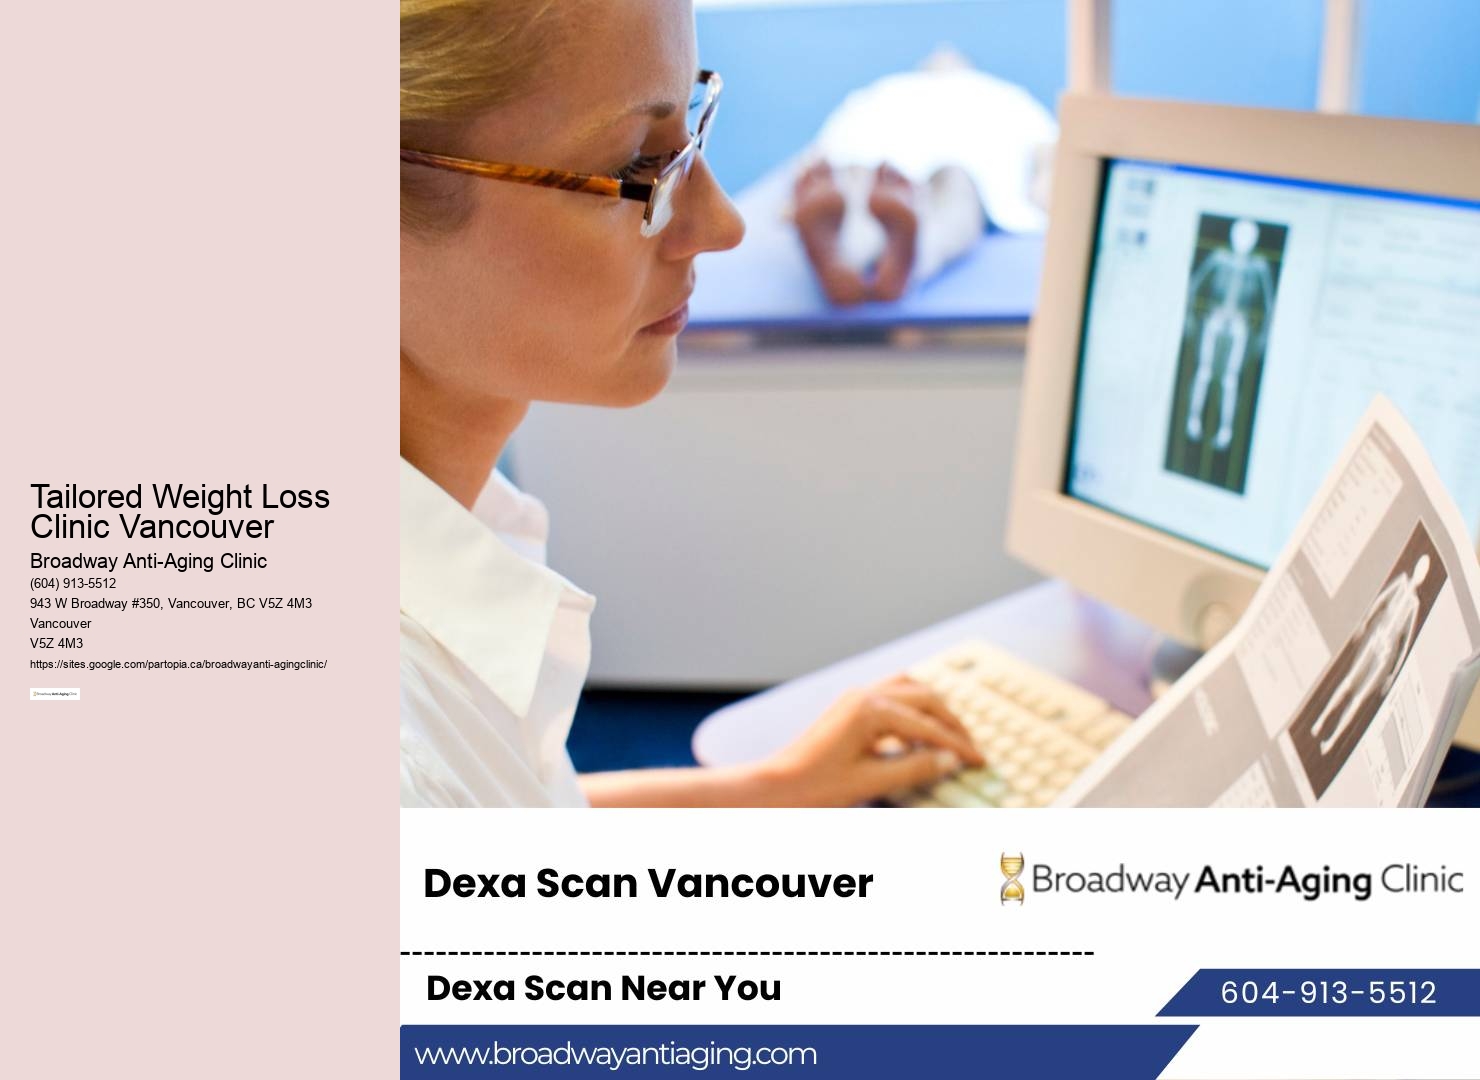 Cutting-edge Medical Weight Loss Clinic Vancouver